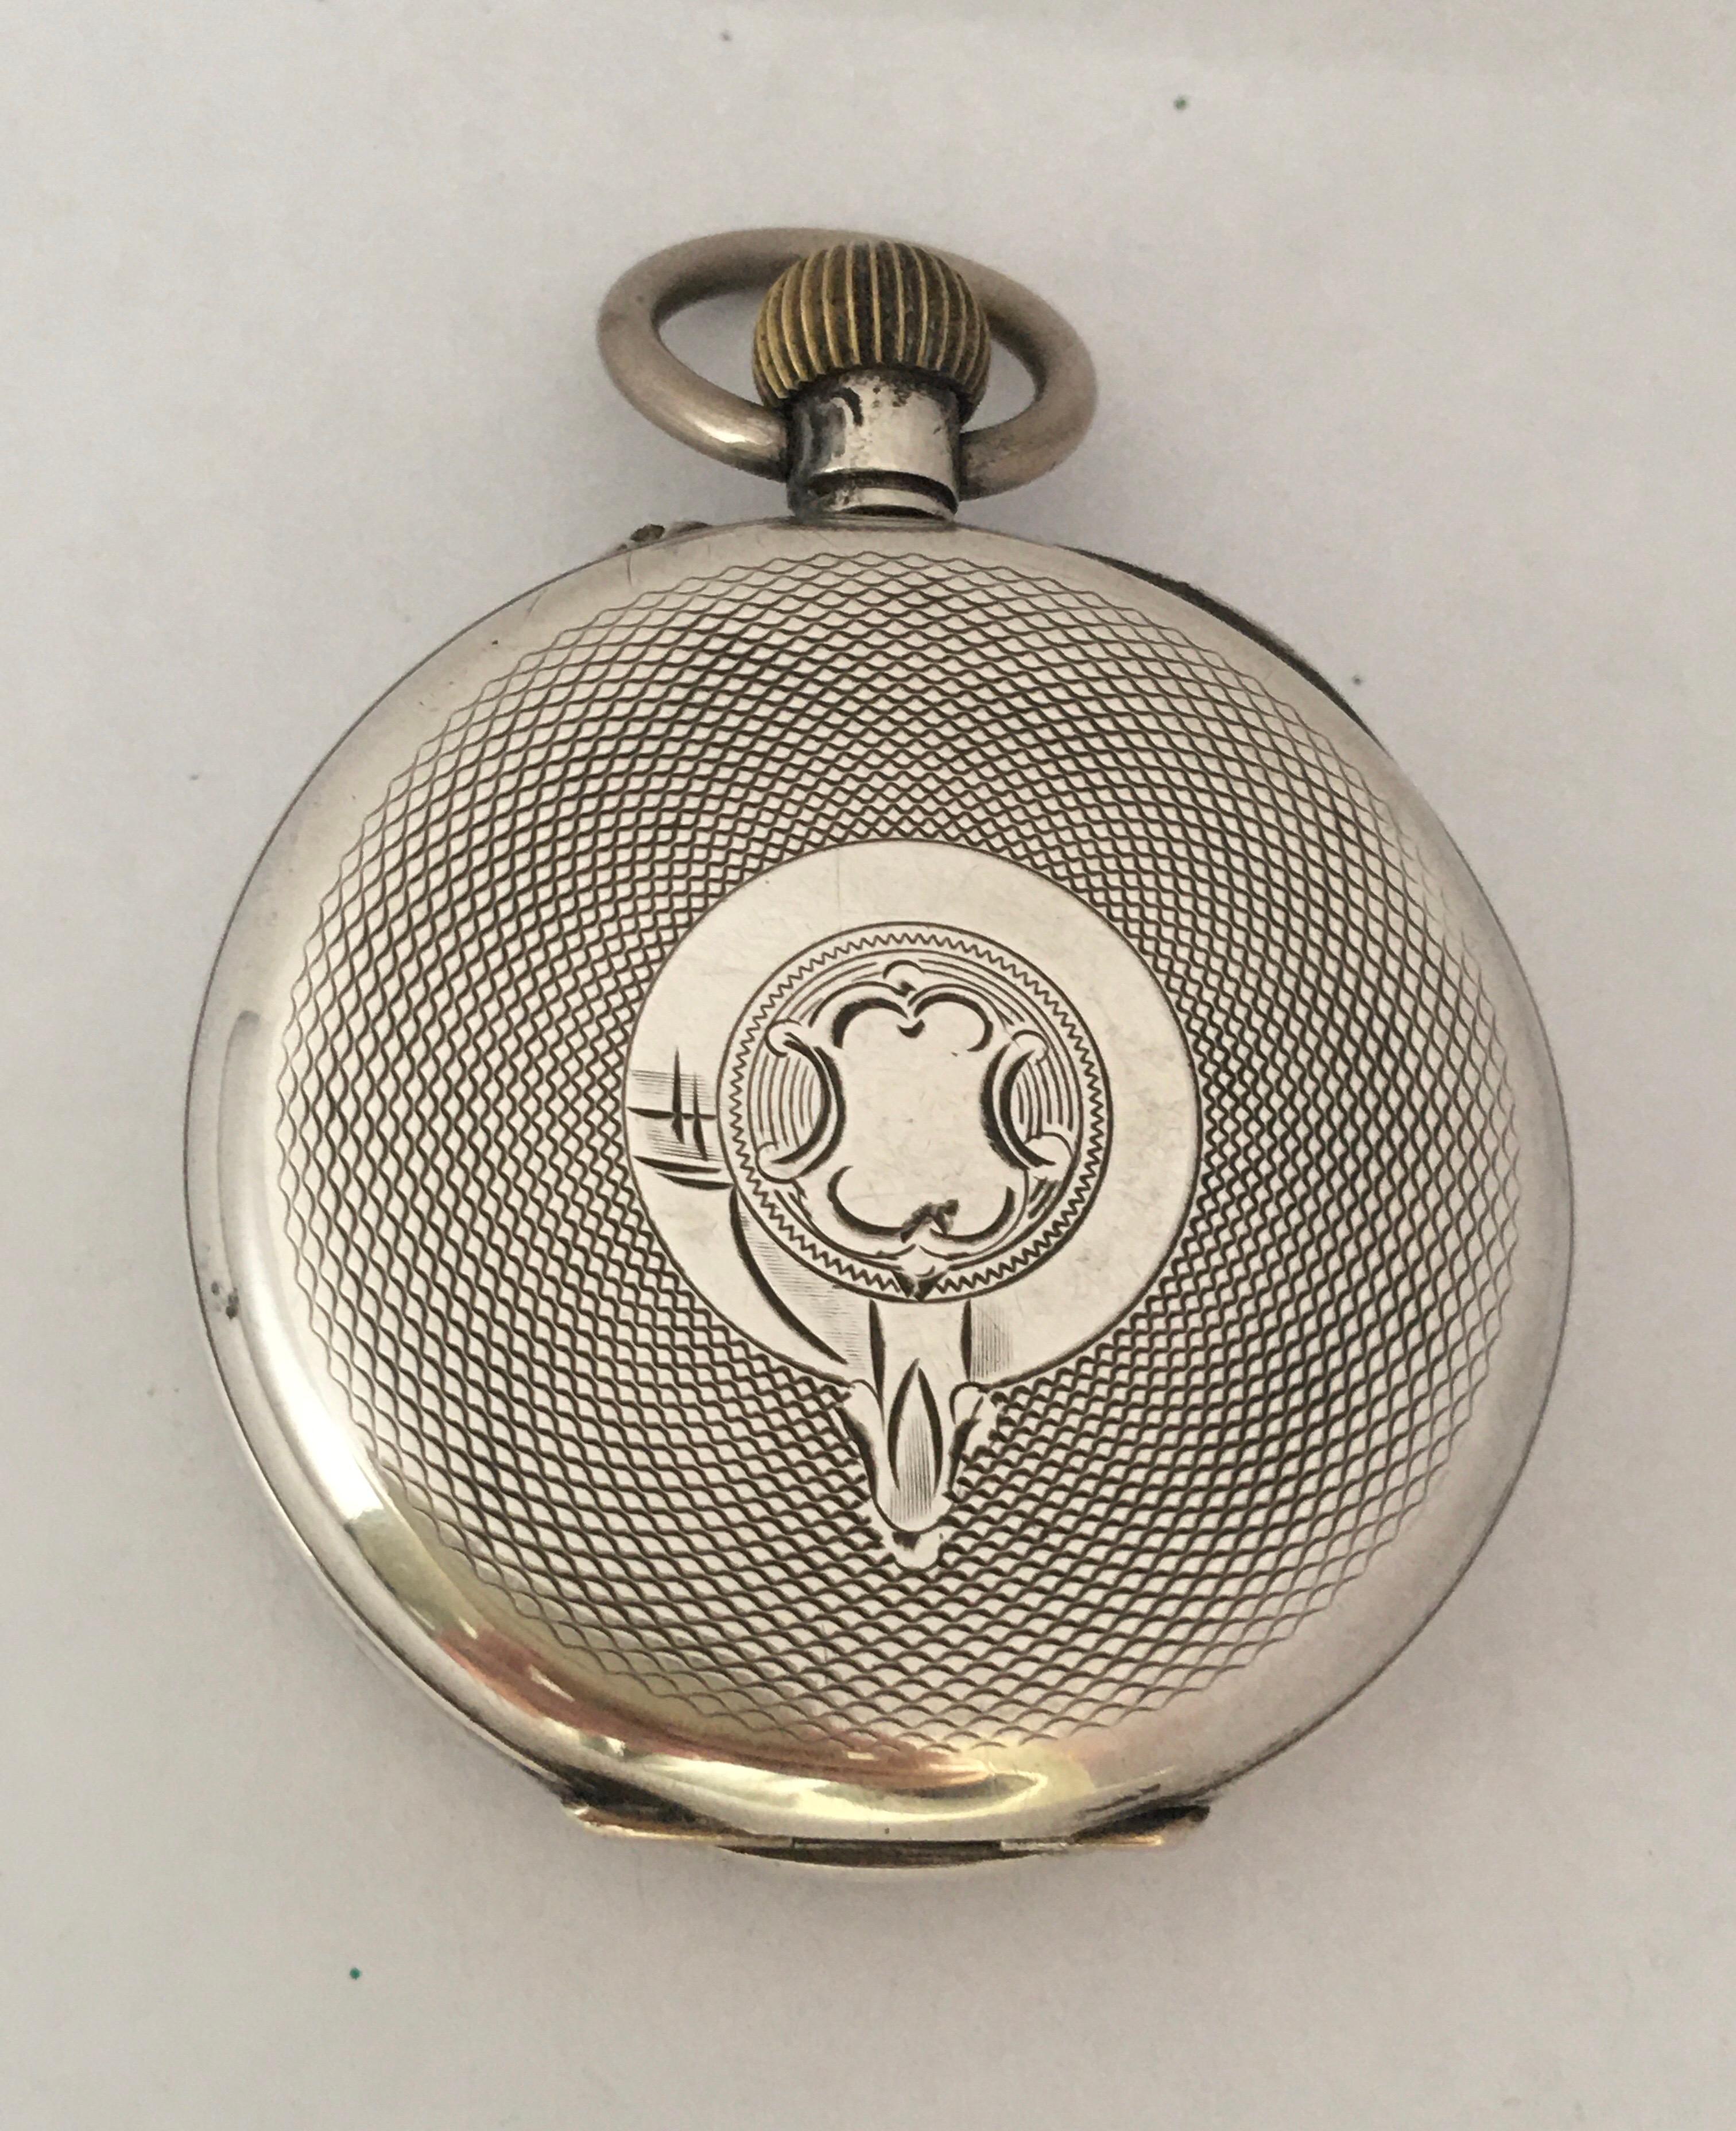 This beautiful antique 46mm diameter hand winding silver pocket watch is in good working condition and it is ticking well. It is a pin set time setting. Visible signs of ageing and wear with small light scratches on the glass and on the silver watch